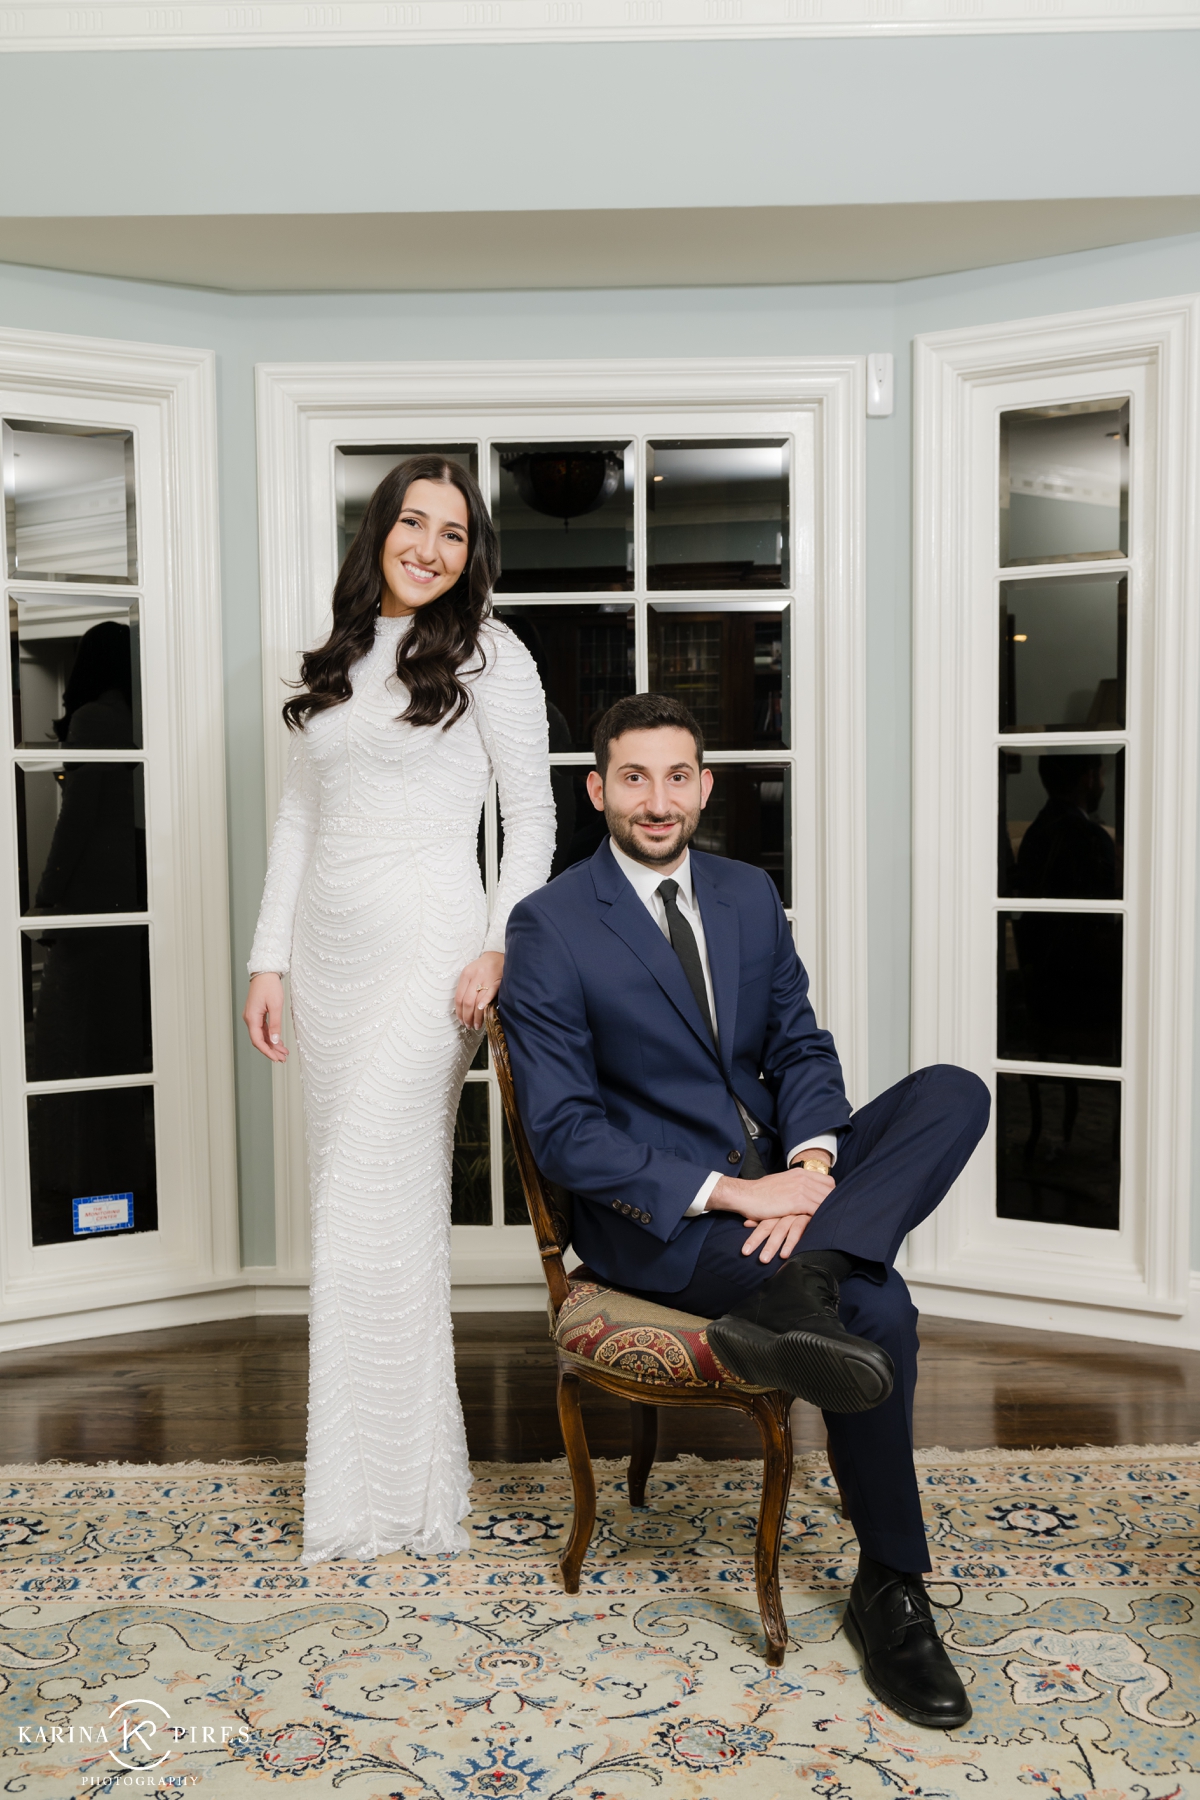 Bride and groom portraits from an Orthodox Jewish engagement party